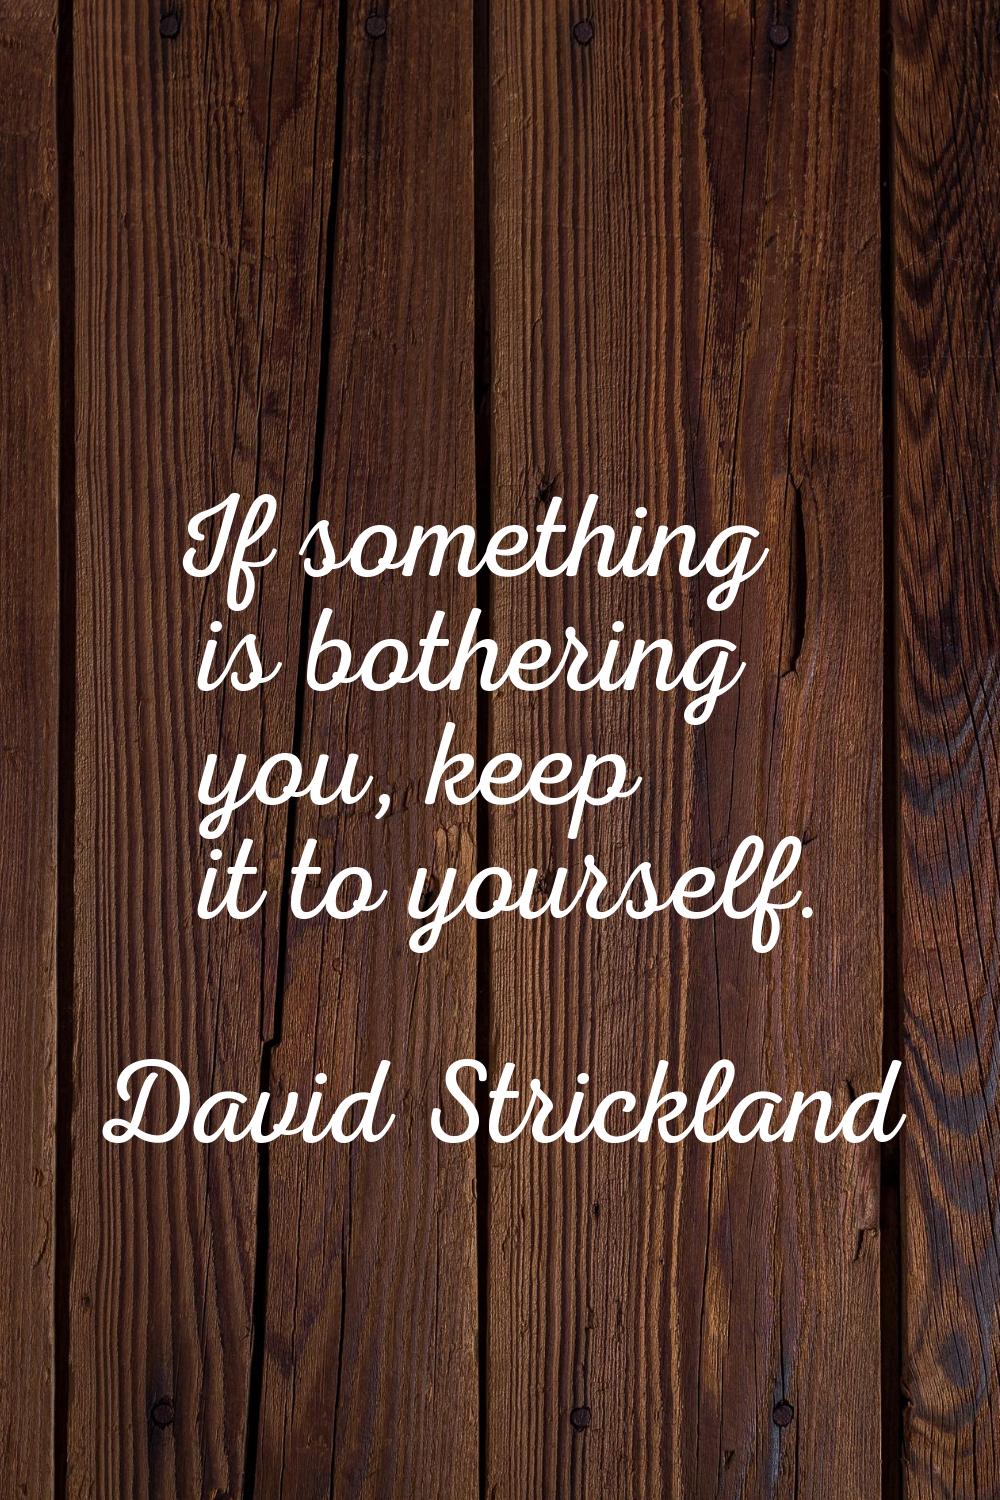 If something is bothering you, keep it to yourself.